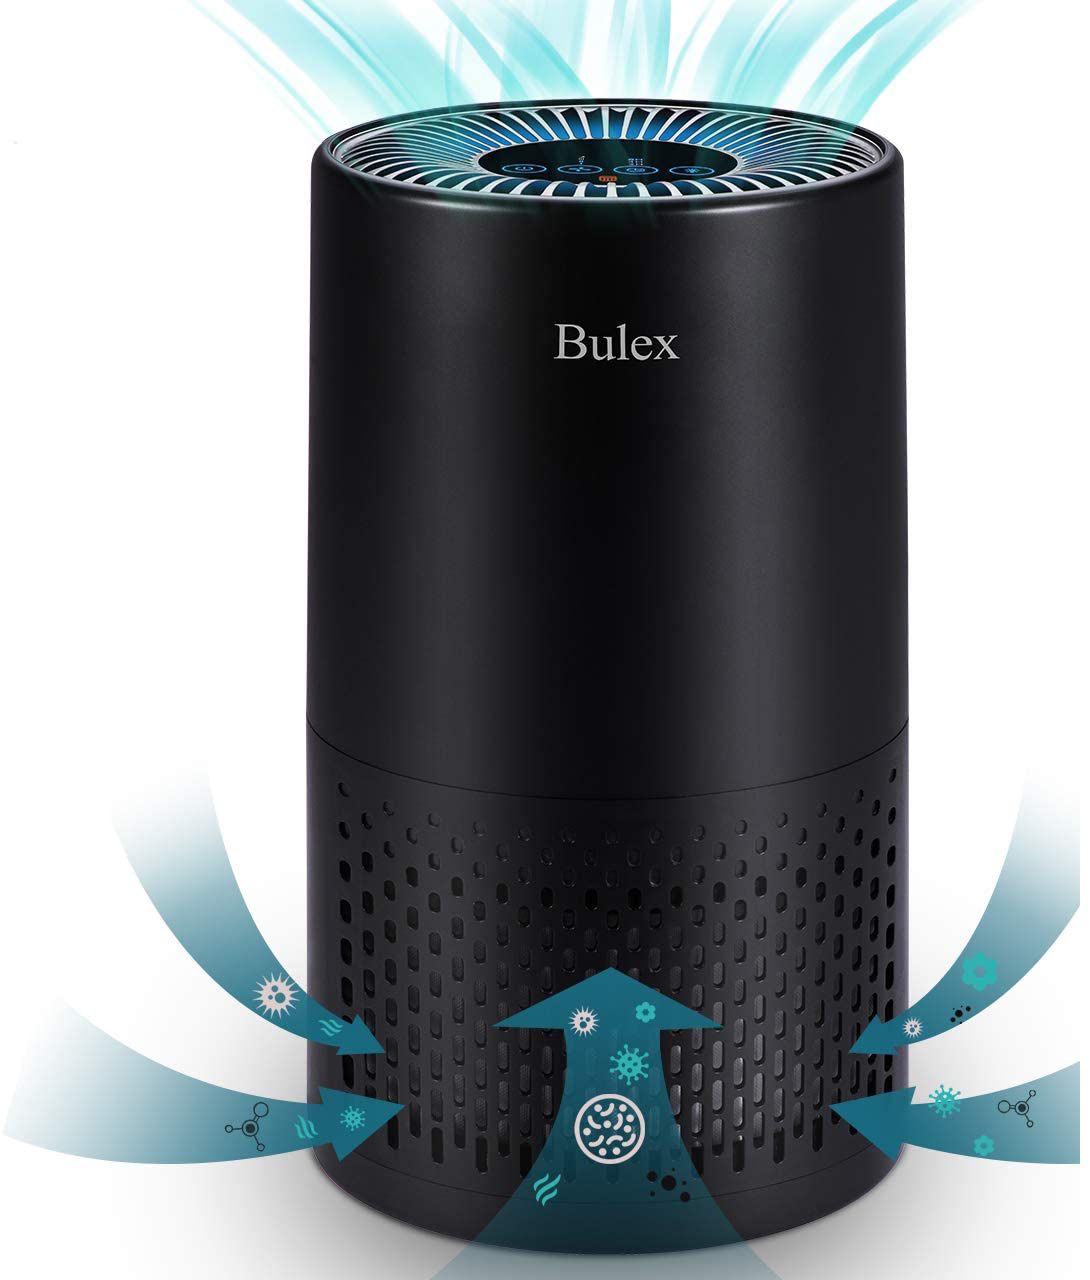 Bulex Air Pu (404ft²), Air Cleaner for Home with H13 True HEPA Filter, 99.97% Purification, 4-Stage Large Room Bedroom Office